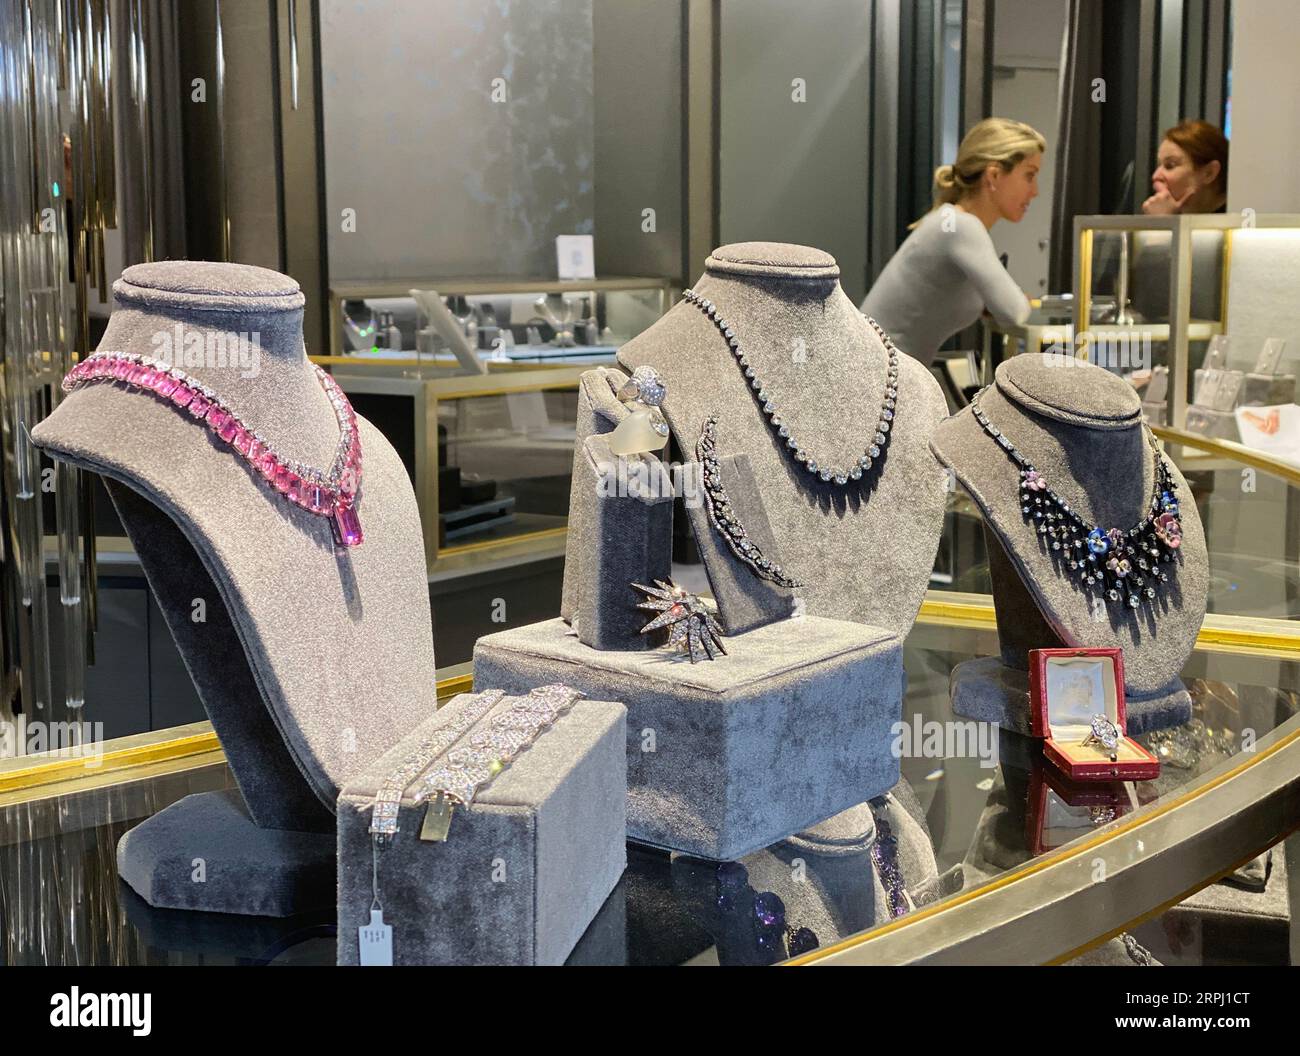 191122 -- NEW YORK, Nov. 22, 2019 -- Vintage jewelry is on display at Fred Leighton, a high-end jewelry store on Madison Avenue in New York, the United States, on Nov. 20, 2019. Held throughout this week, the New York City Jewelry Week NYCJW is the first local cultural event dedicated to celebrating jewelry, for its second year. It offers over 130 events of exhibitions, panel discussions, workshop visits and heritage-house tours across Manhattan and Brooklyn.  TO GO WITH Feature: Vintage style, modern craftsmanship sparkle at NYC Jewelry Week U.S.-NEW YORK-JEWELRY WEEK MiaoxXiaojuan PUBLICATIO Stock Photo